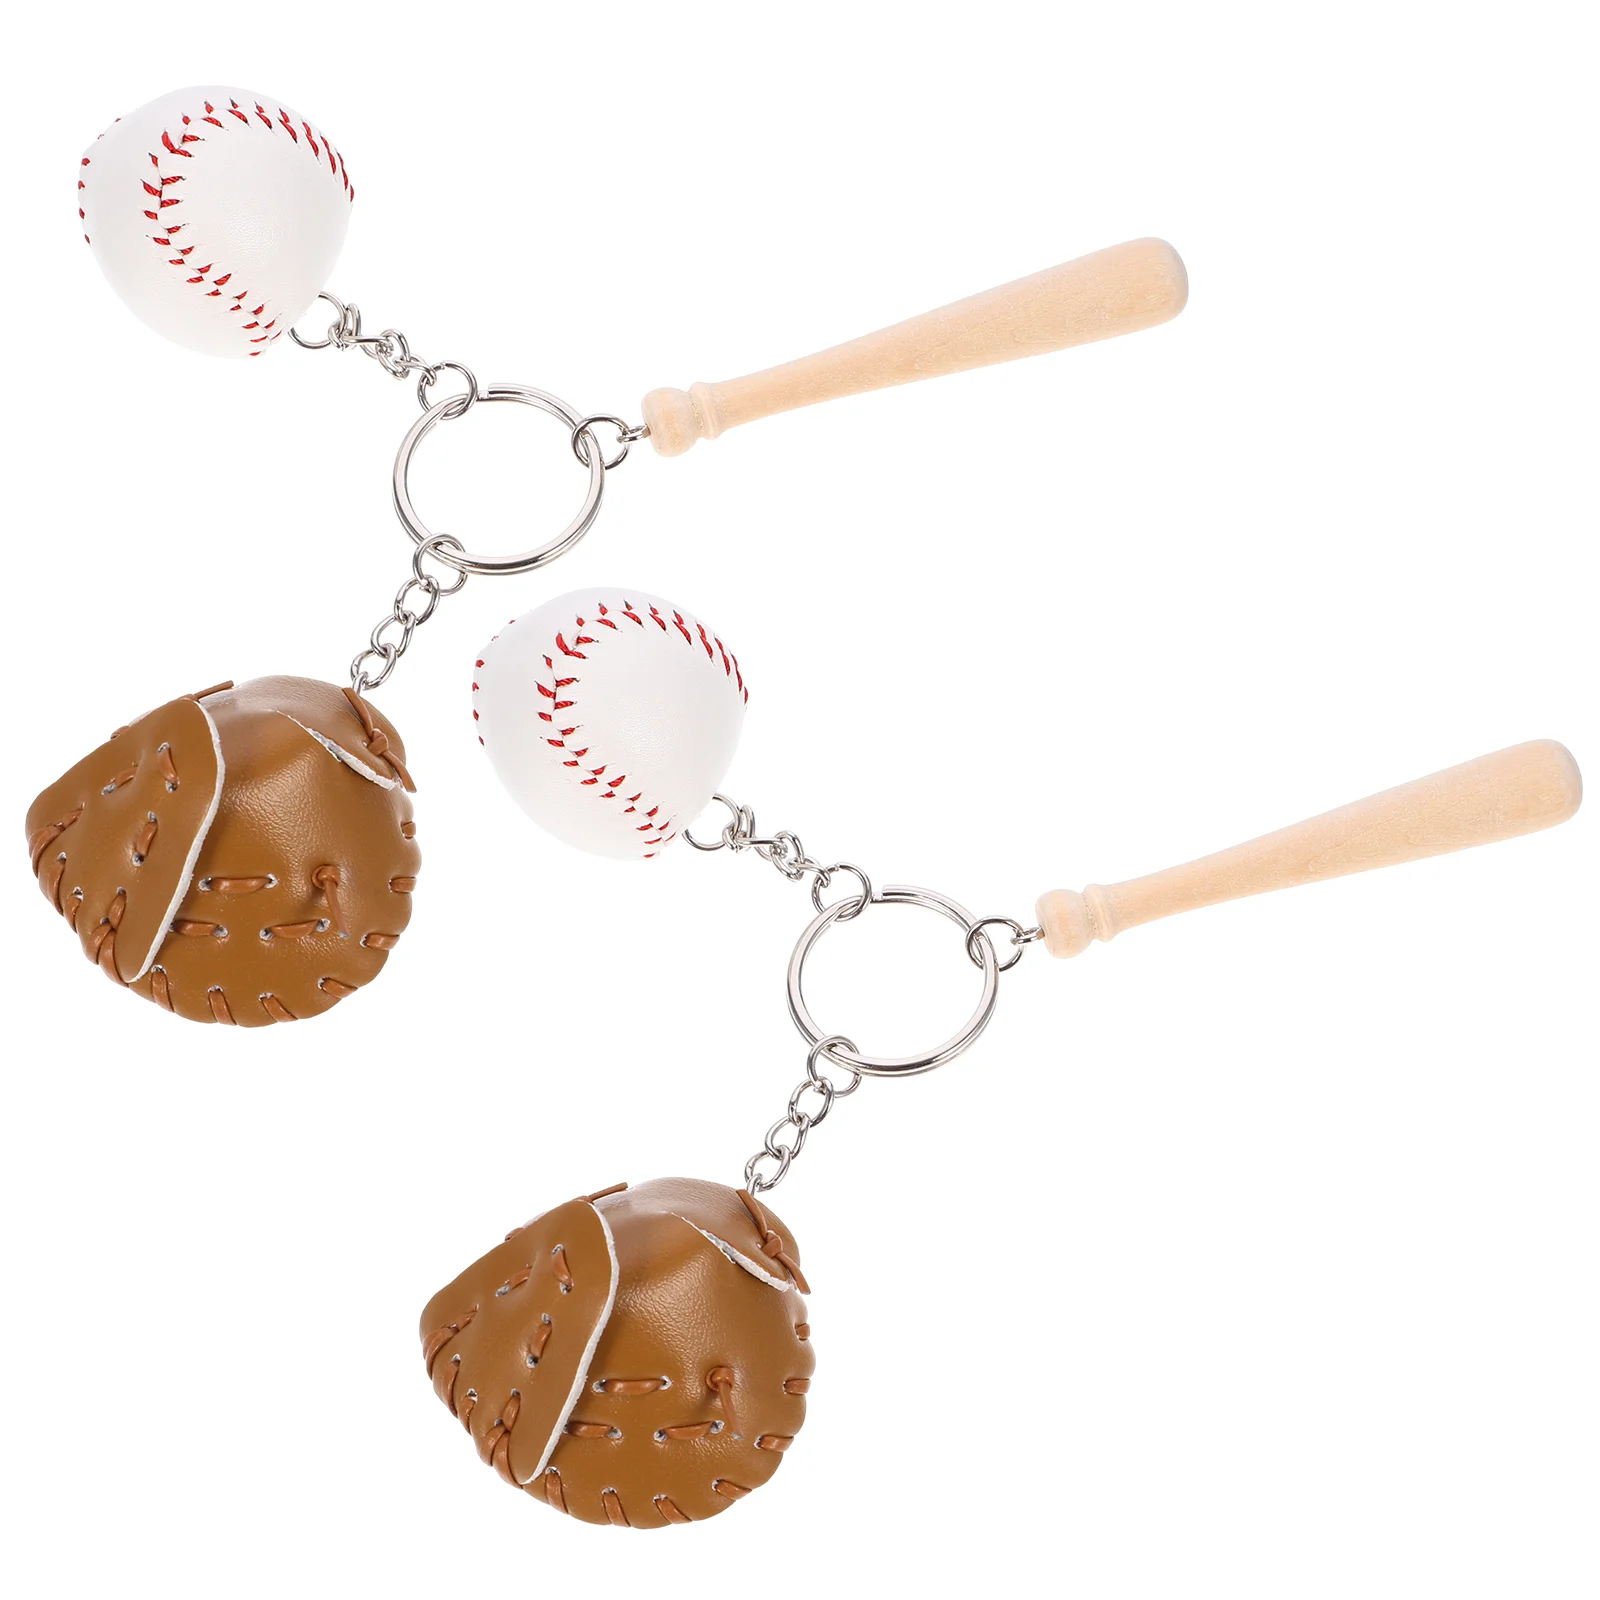 2 Pcs Baseball Pendant Christmas Goodies Keychain for Boys Shams Backpack Keychains Women Wood Ring Accessories